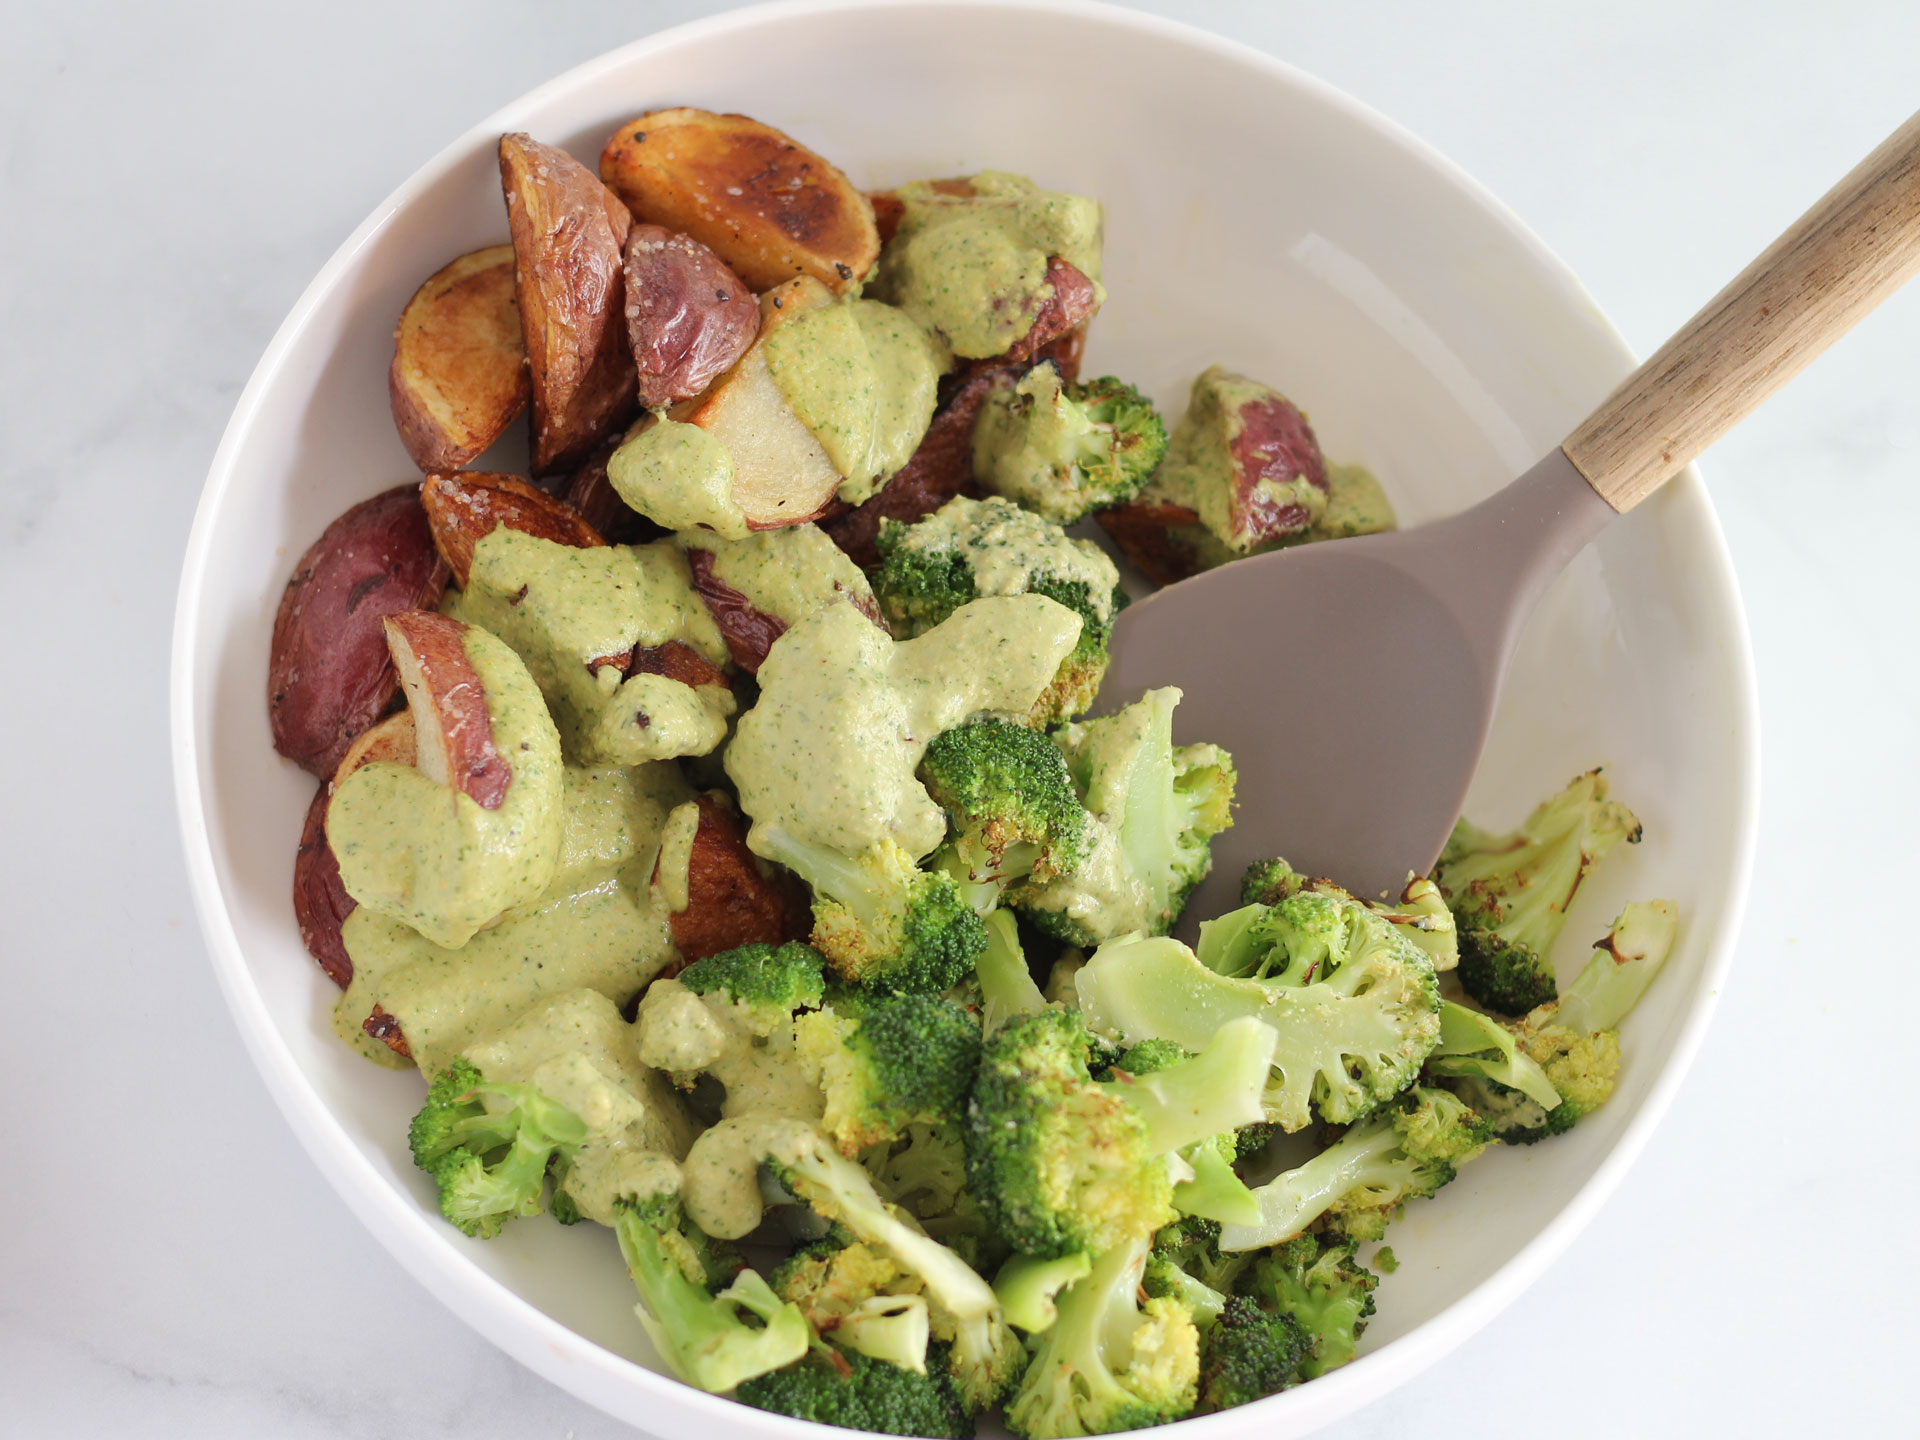 Charred Broccoli with Pan Roasted Potatoes and Creamy Herb Dressing